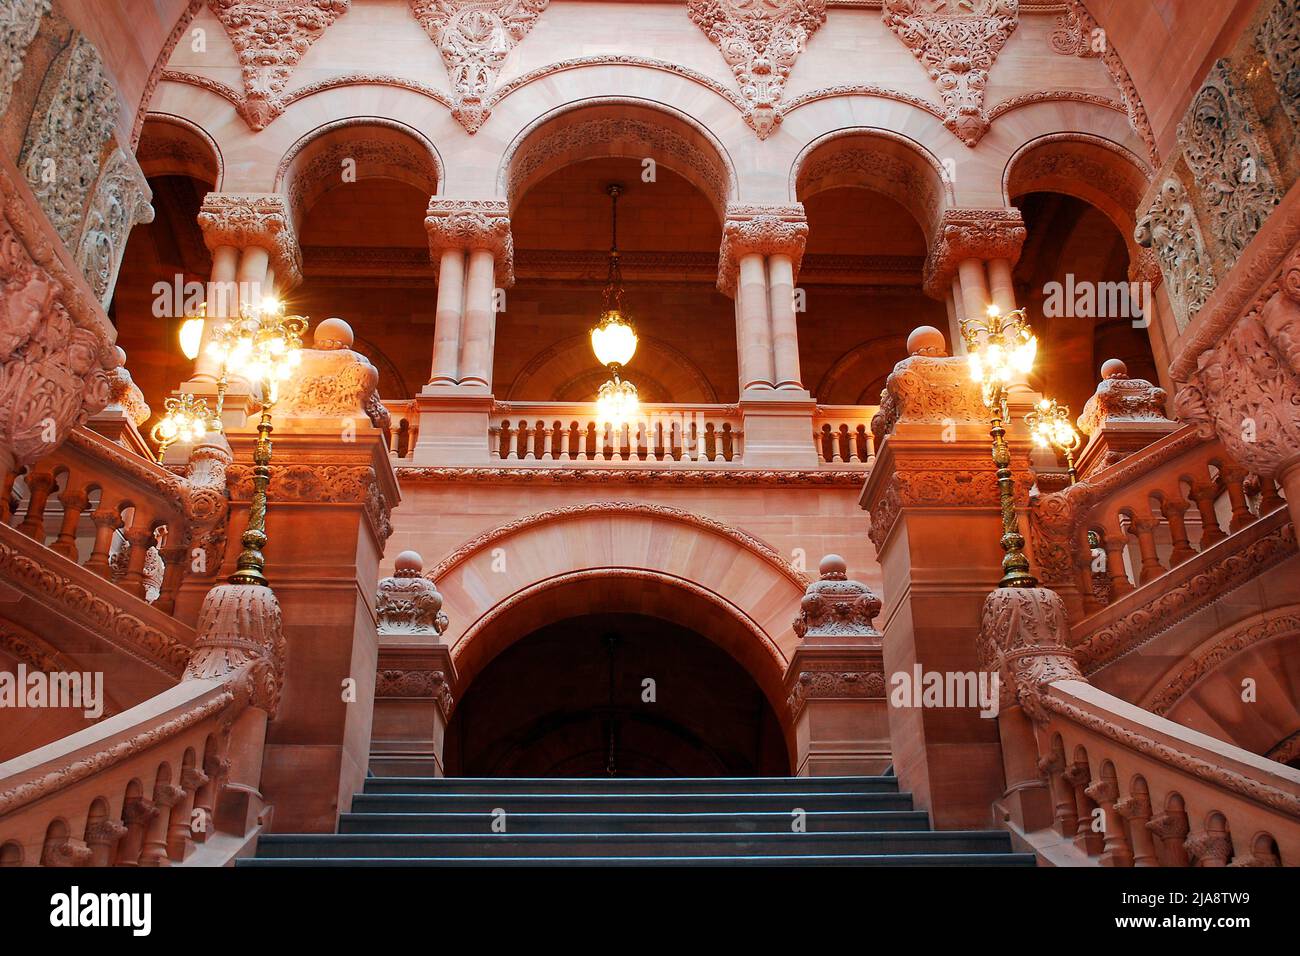 Ornate designs of the Million Dollar Staircase at the New York State Capitol in Albany Stock Photo